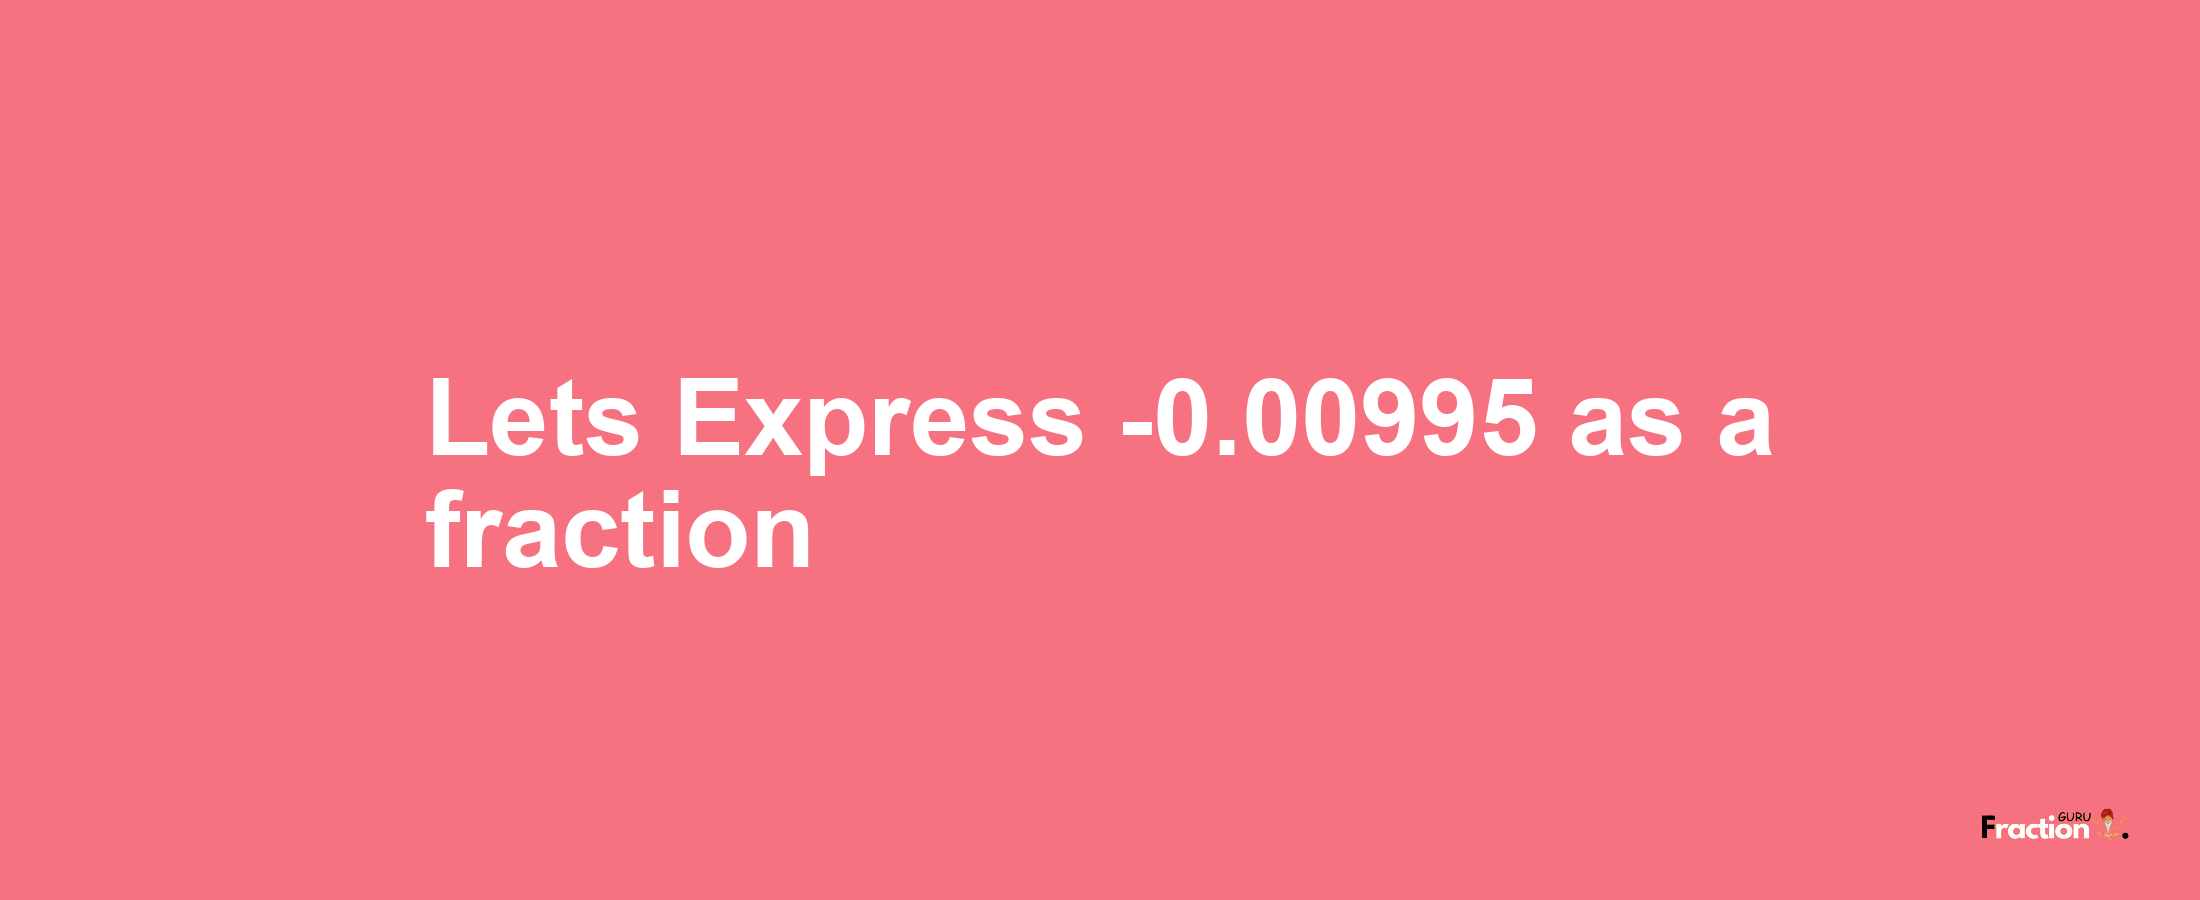 Lets Express -0.00995 as afraction